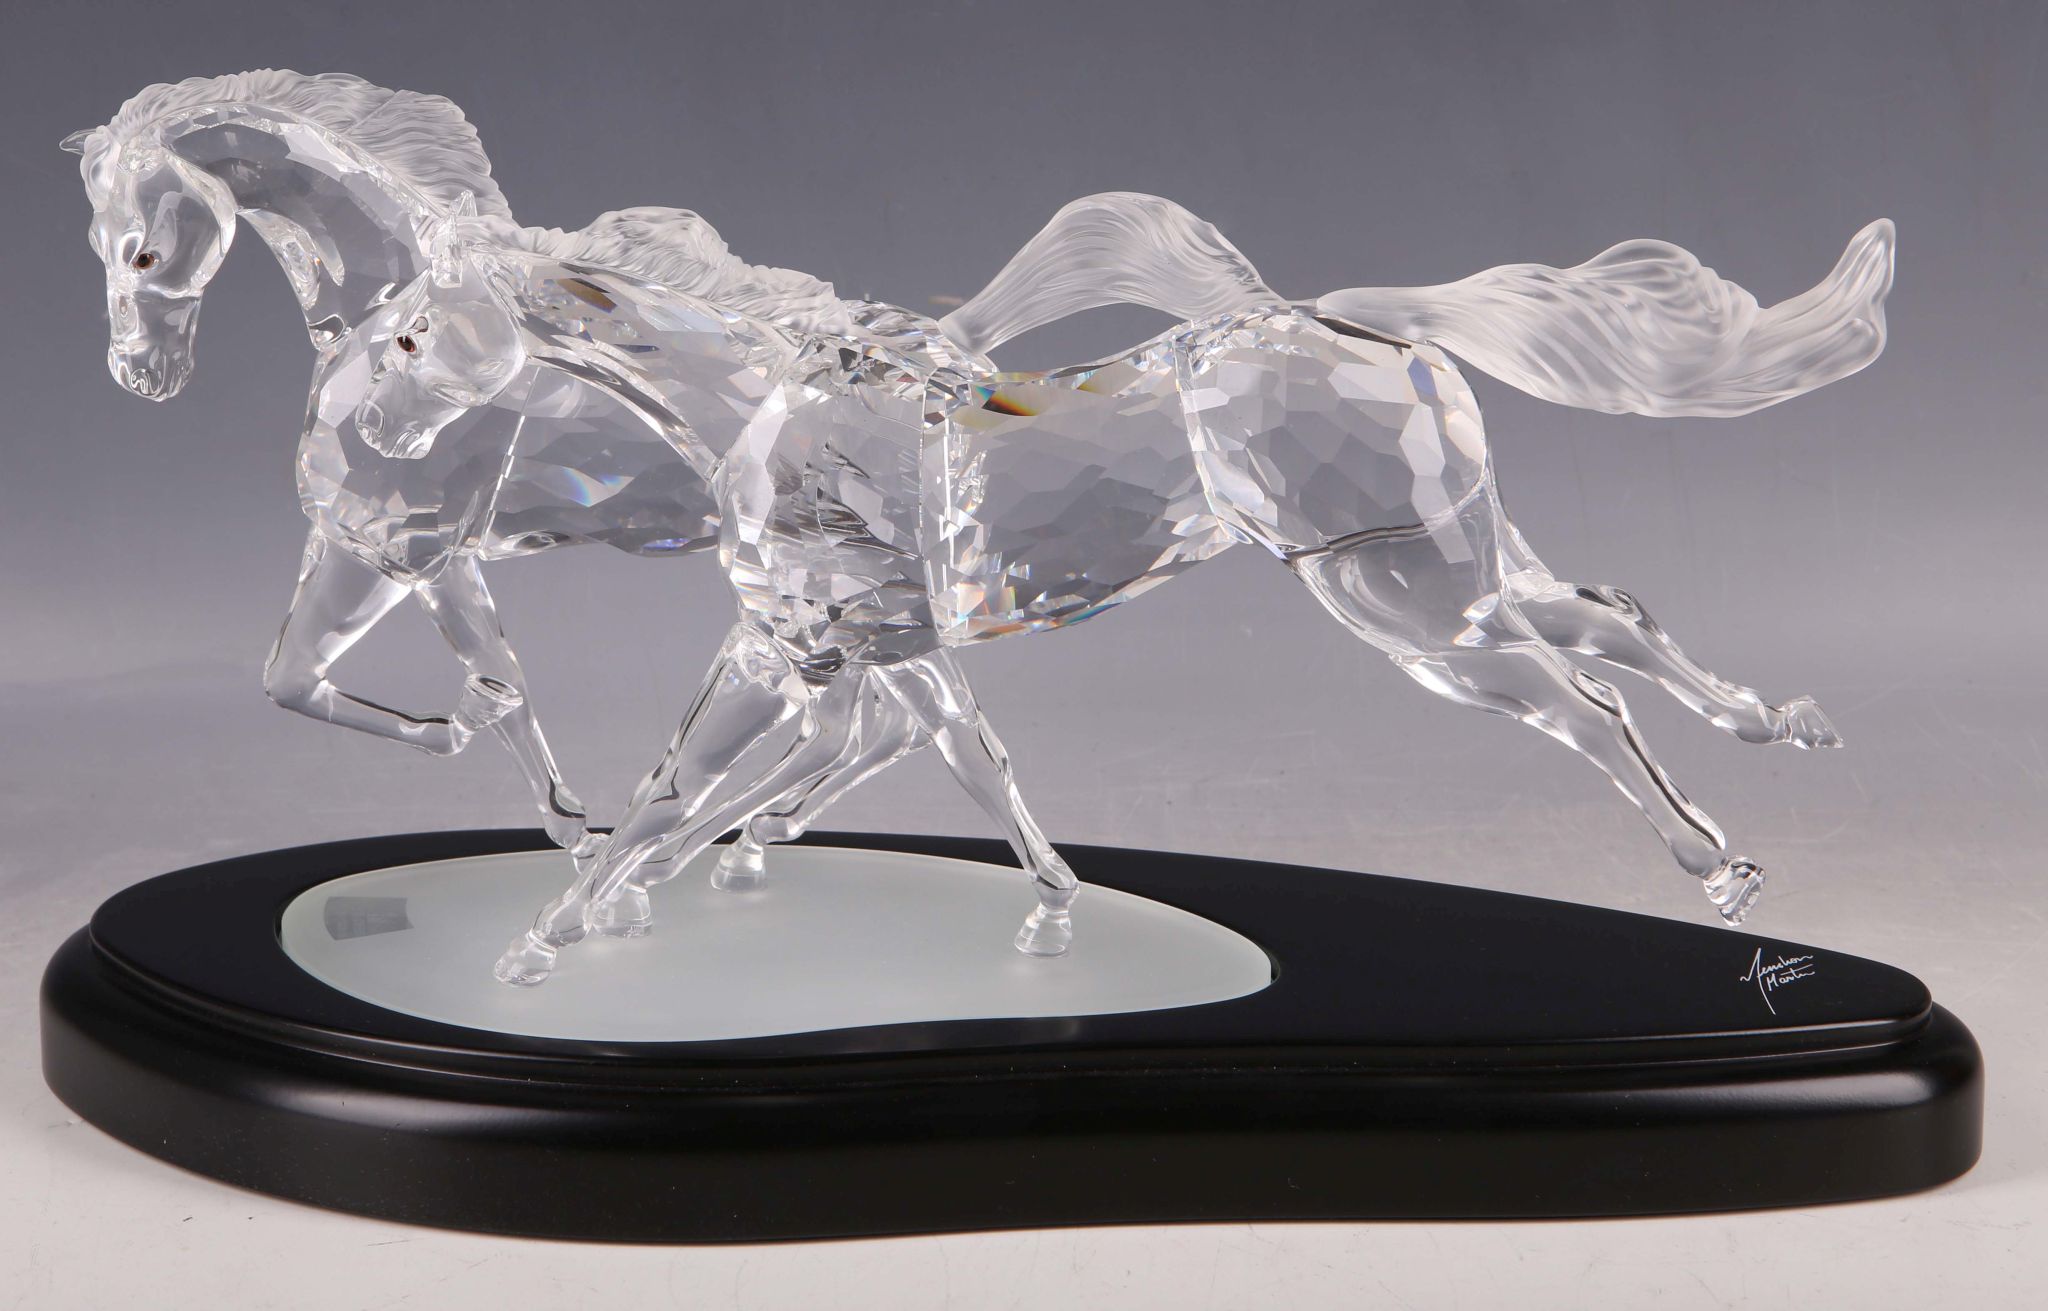 Swarovski crystal `The Wild Horses`, 2001, designed by Martin Zendron, SCS members limited edition